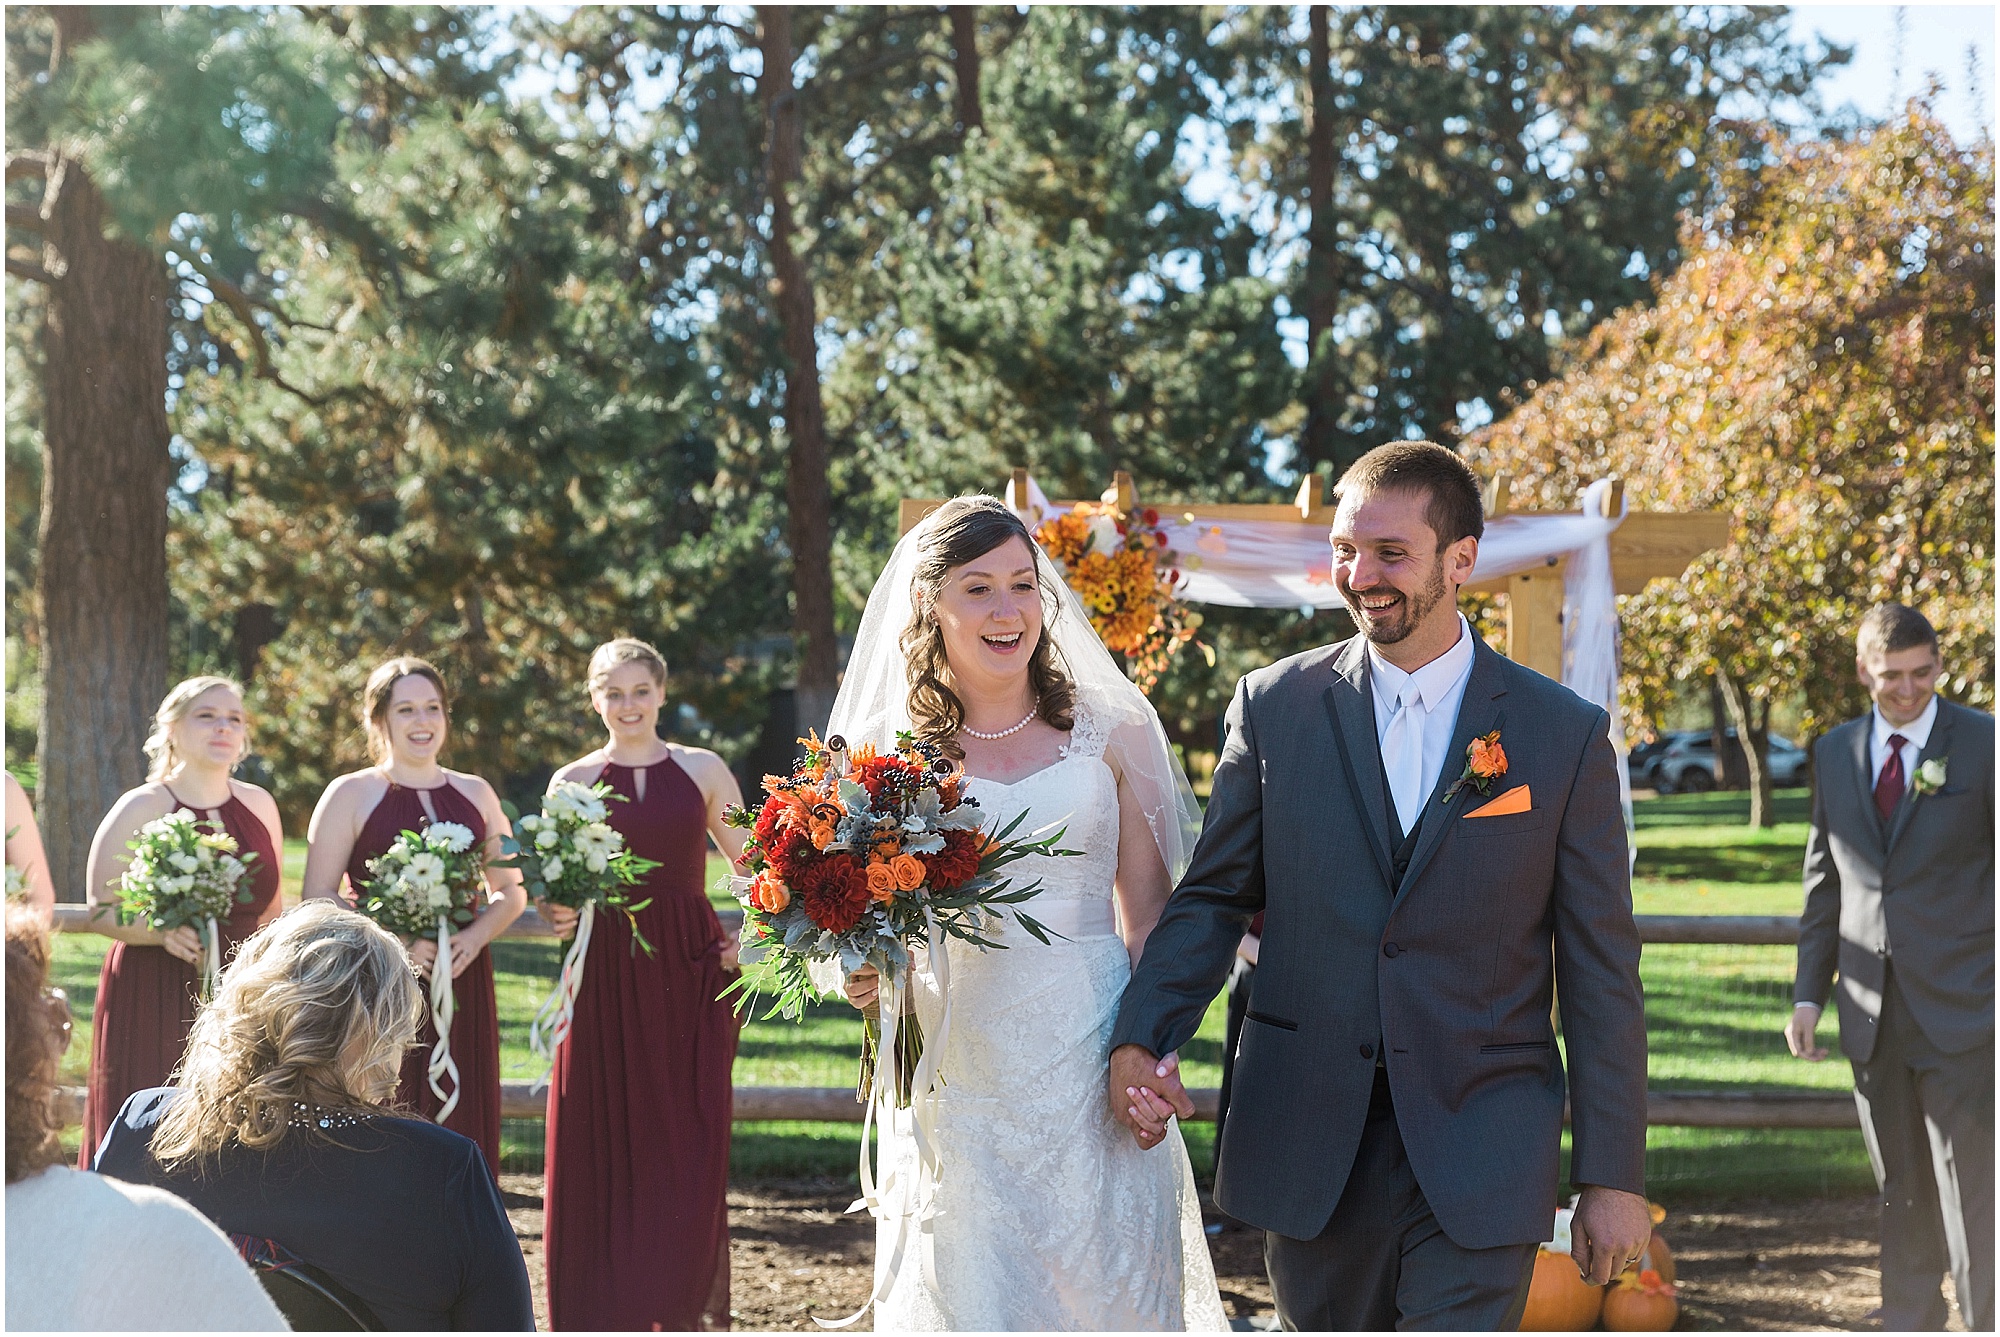 The happy couple is announced husband and wife and cheered on by their family at their Hollinshead Barn fall wedding in Bend, OR. | Erica Swantek Photography